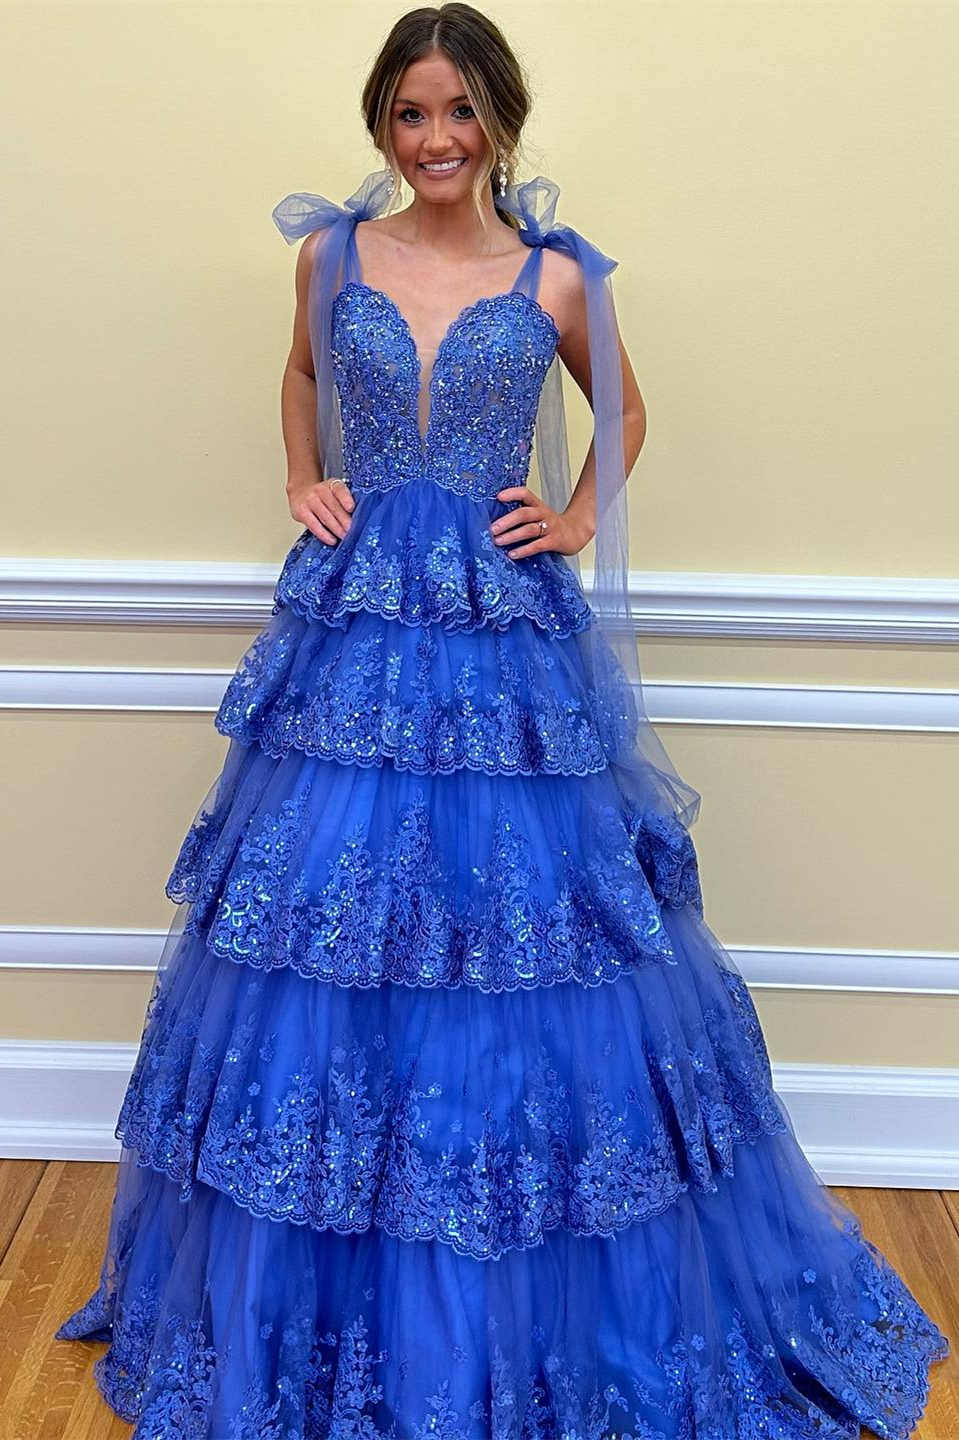 Tie Straps Light Blue Plunging Neck Layered Prom Dress with Appliques